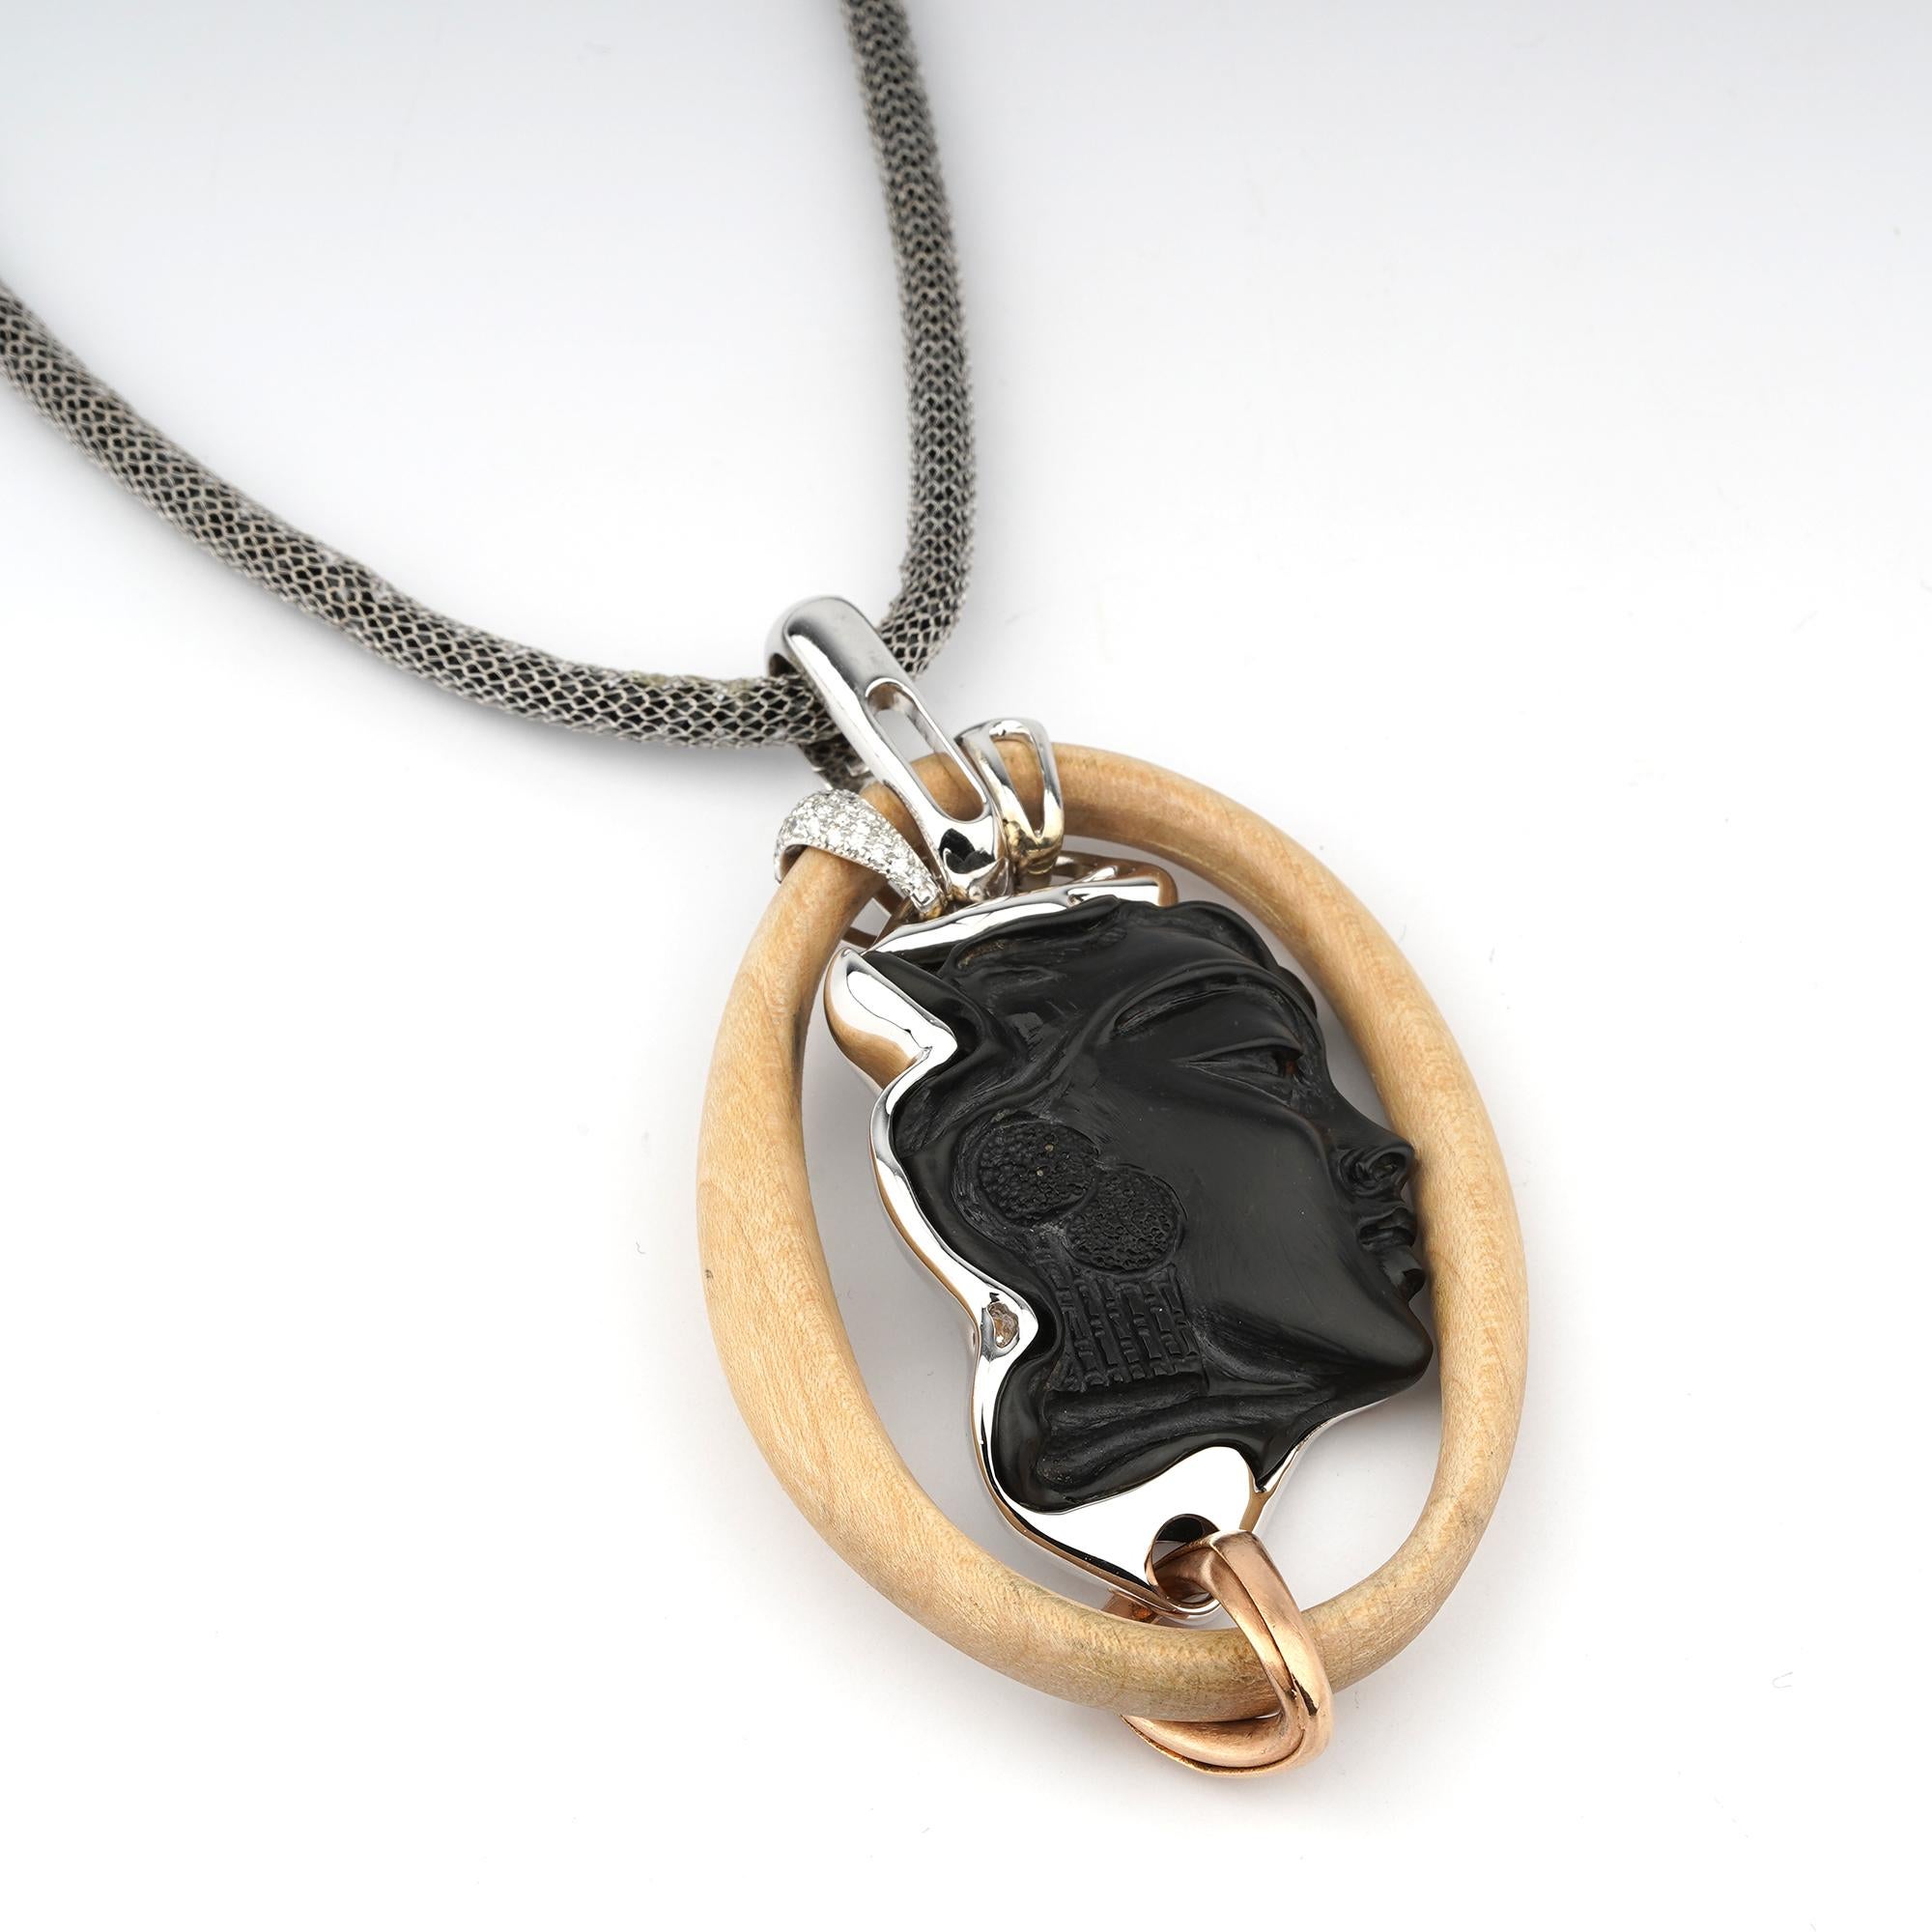 18 carat White Gold and Maple Wood Pendant Necklace with 0,3ct diamonds and 45mm Portrait carving Onyx Cameo. Exclusive gold jewellery piece made, carved in Maple Wood, with 18kt White gold frame embellished with 0,3ct diamond  and with 45mm long